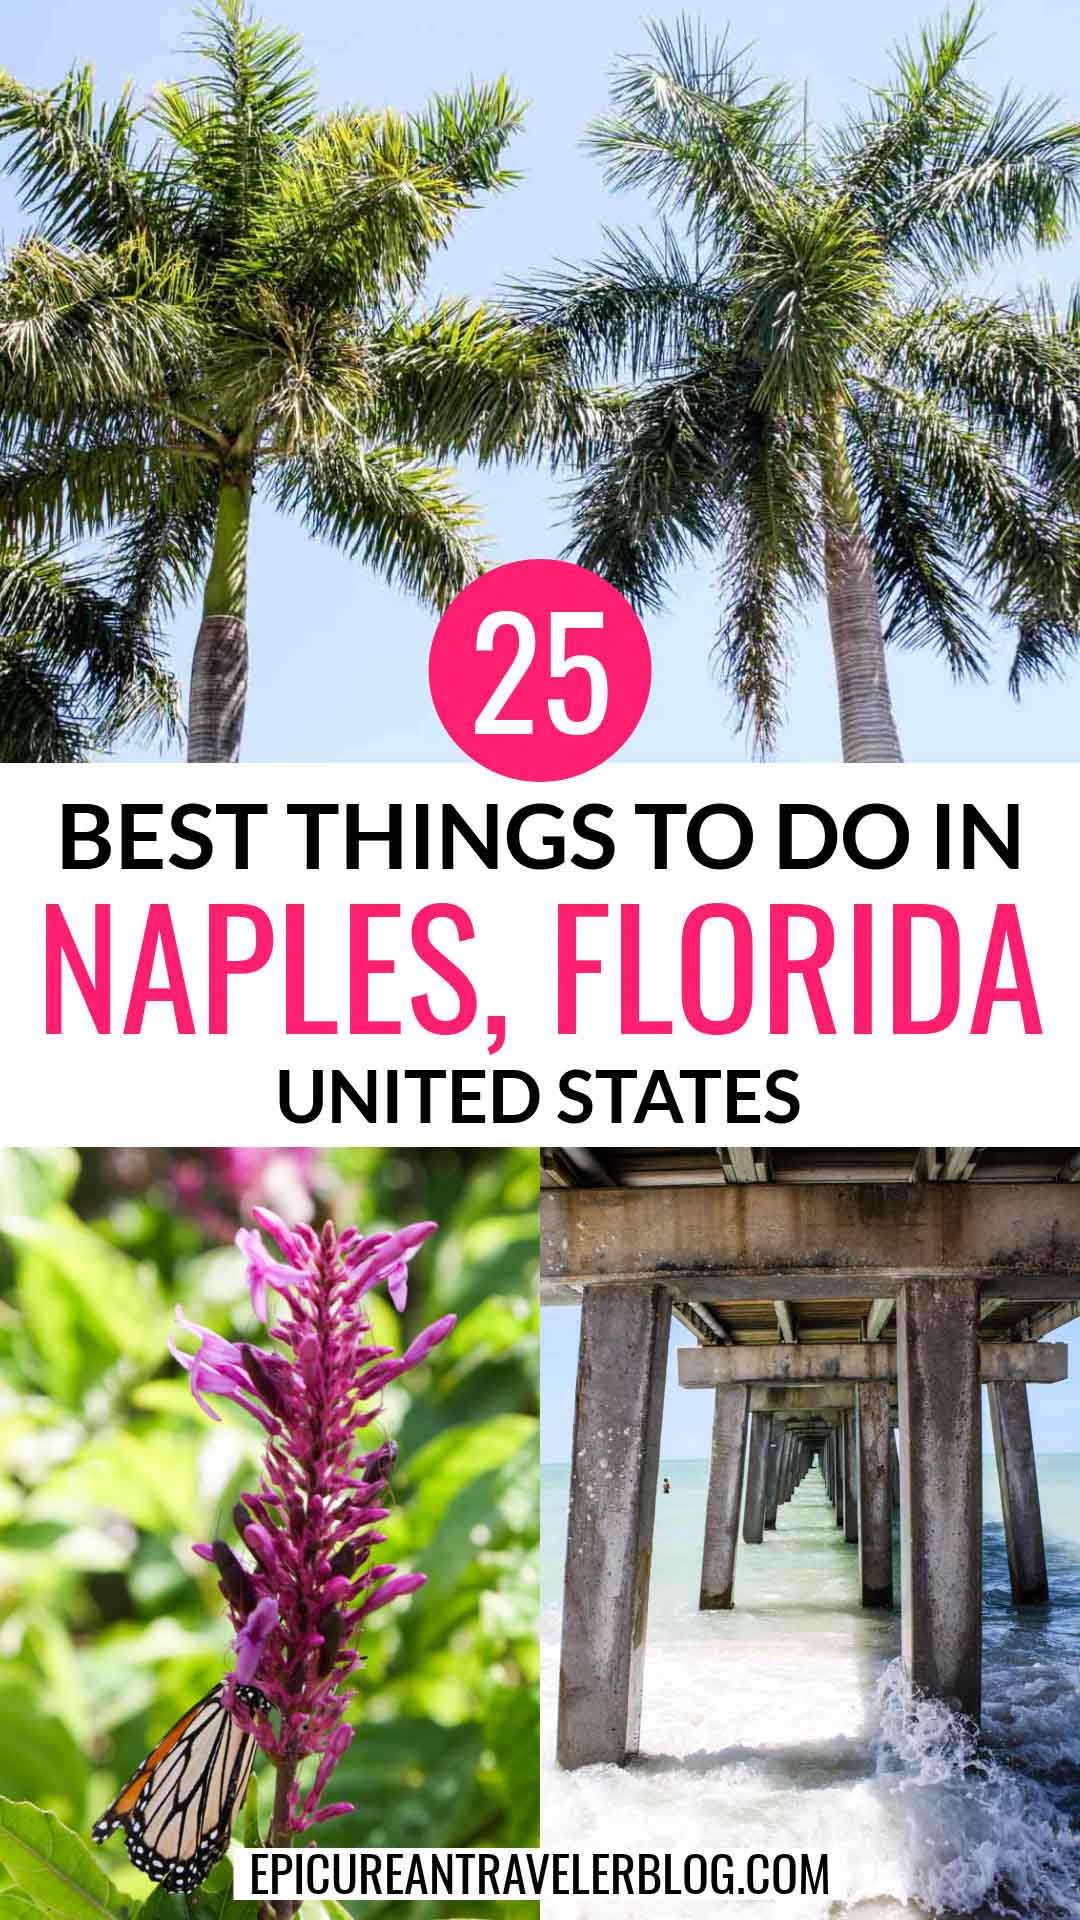 25 best things to do in Naples, Florida